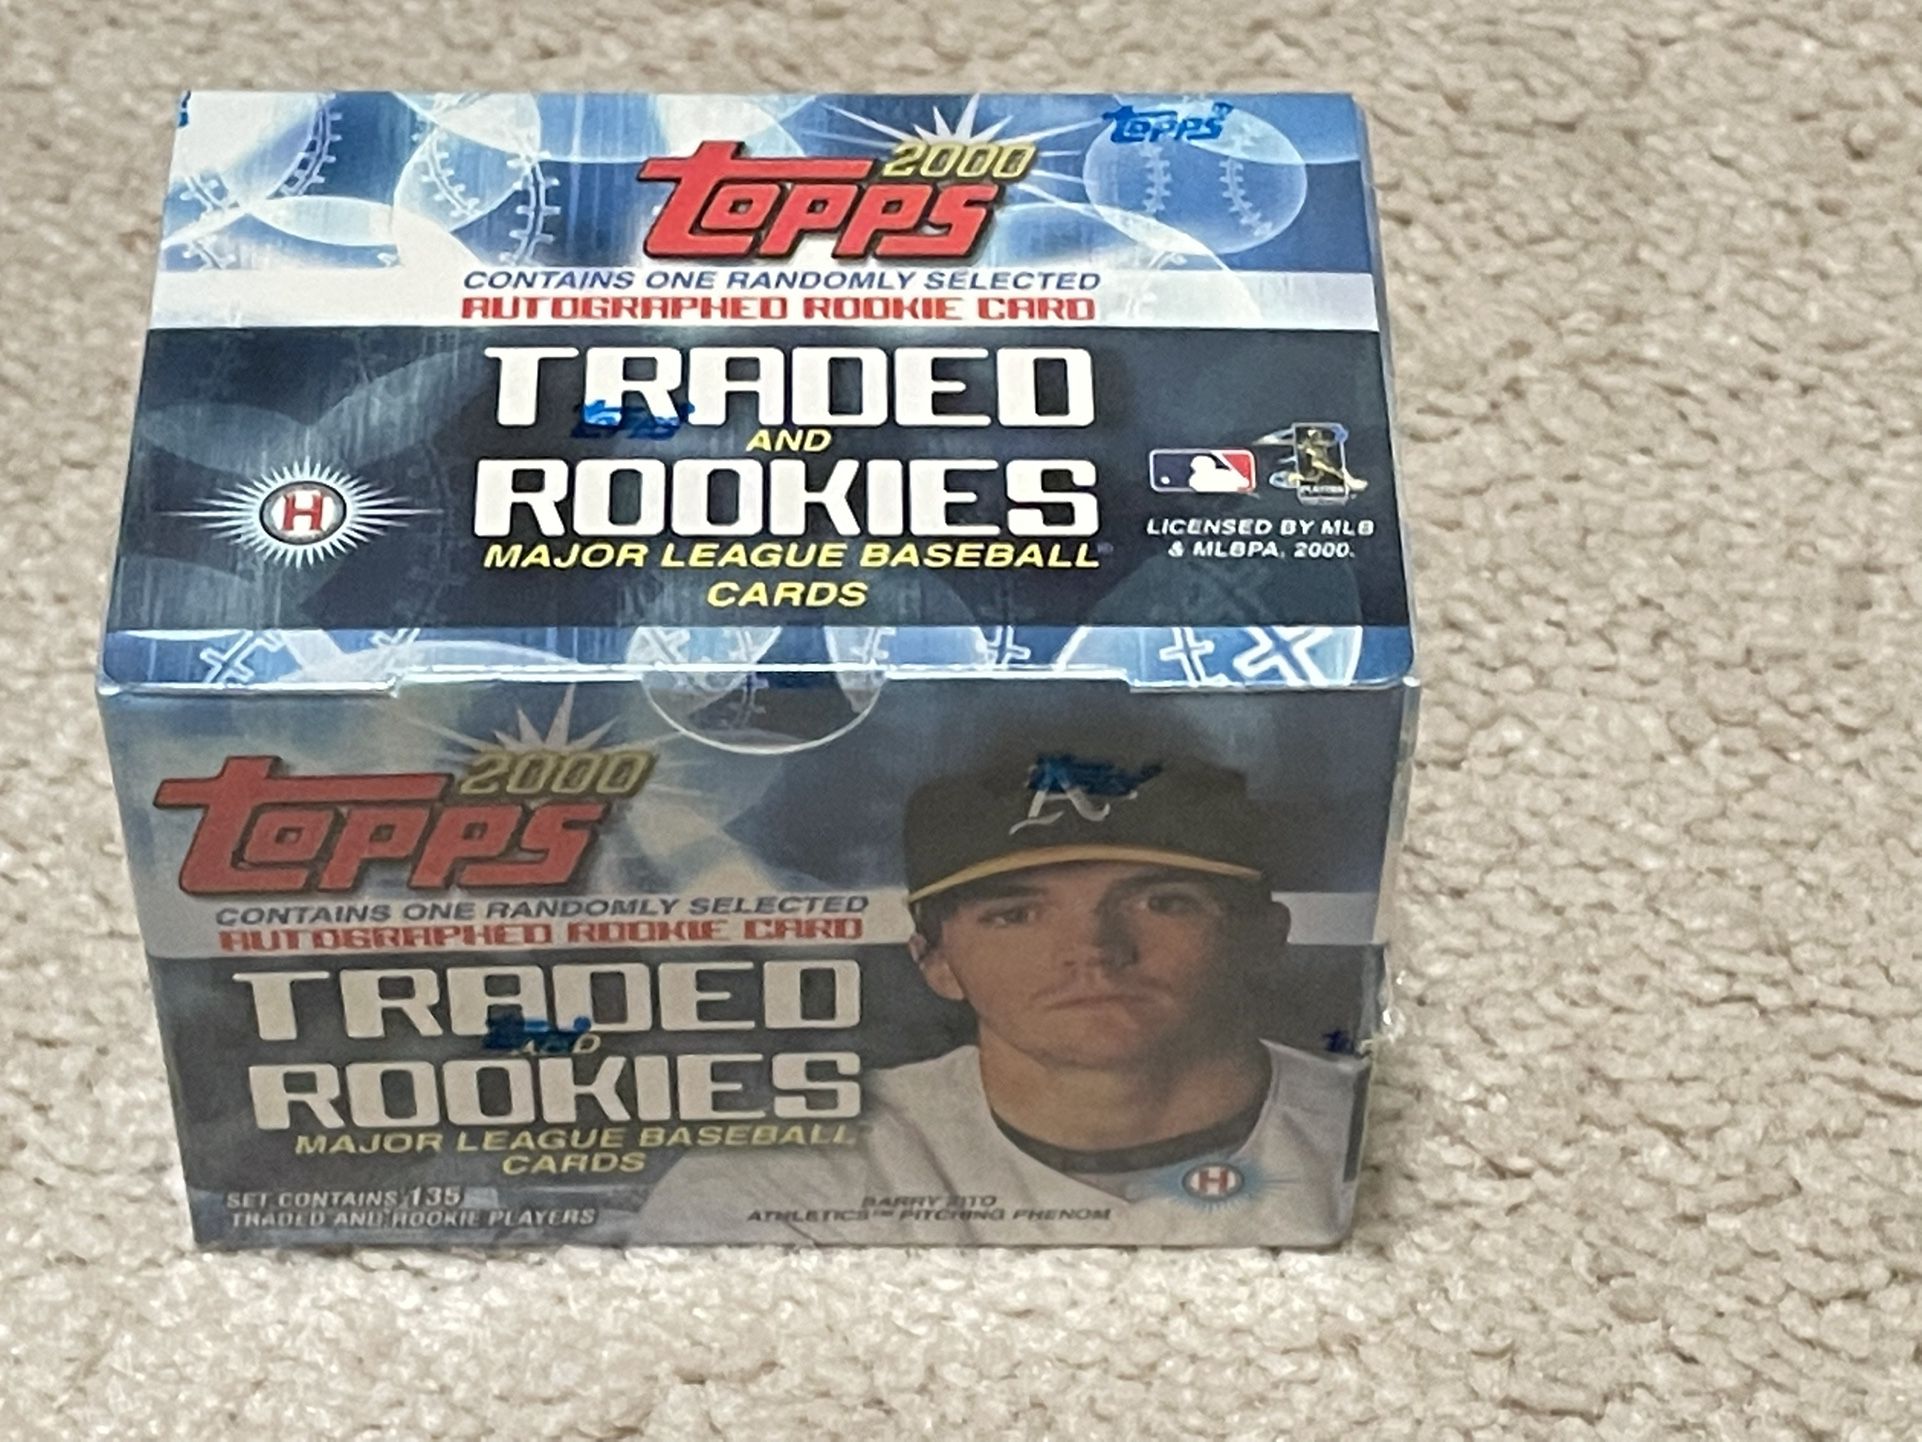 2000 Topps Traded and Rookies sealed factory set